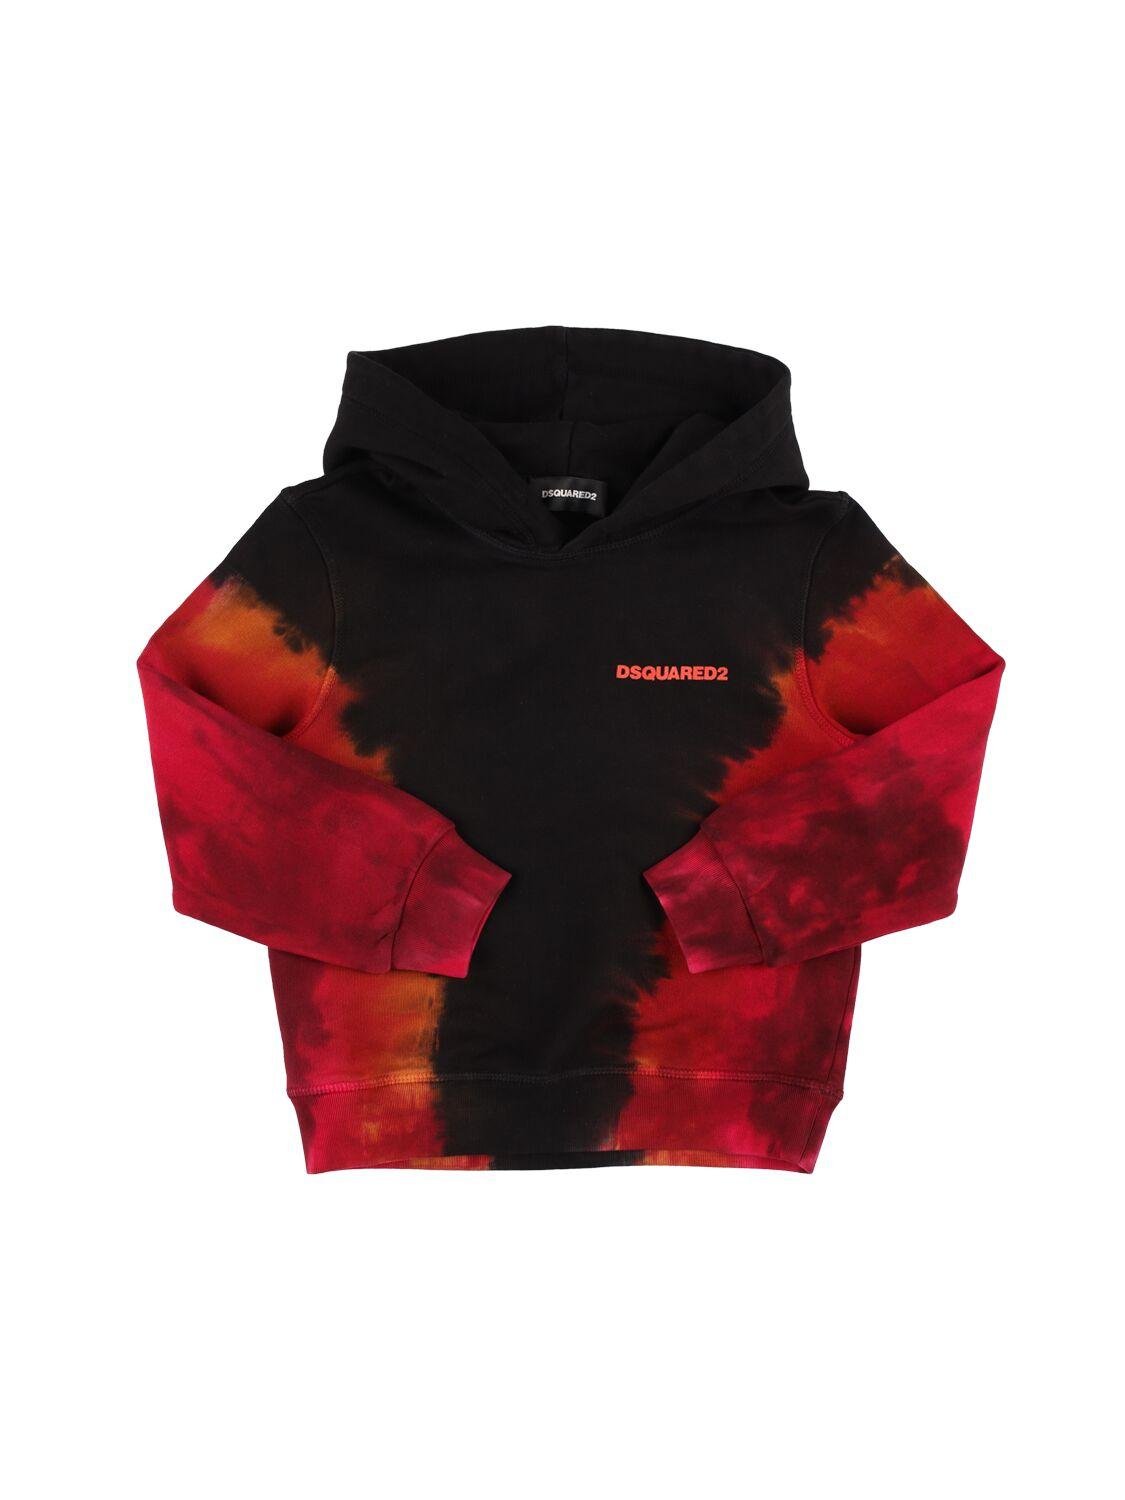 Printed Cotton Hooded Sweatshirt by DSQUARED2